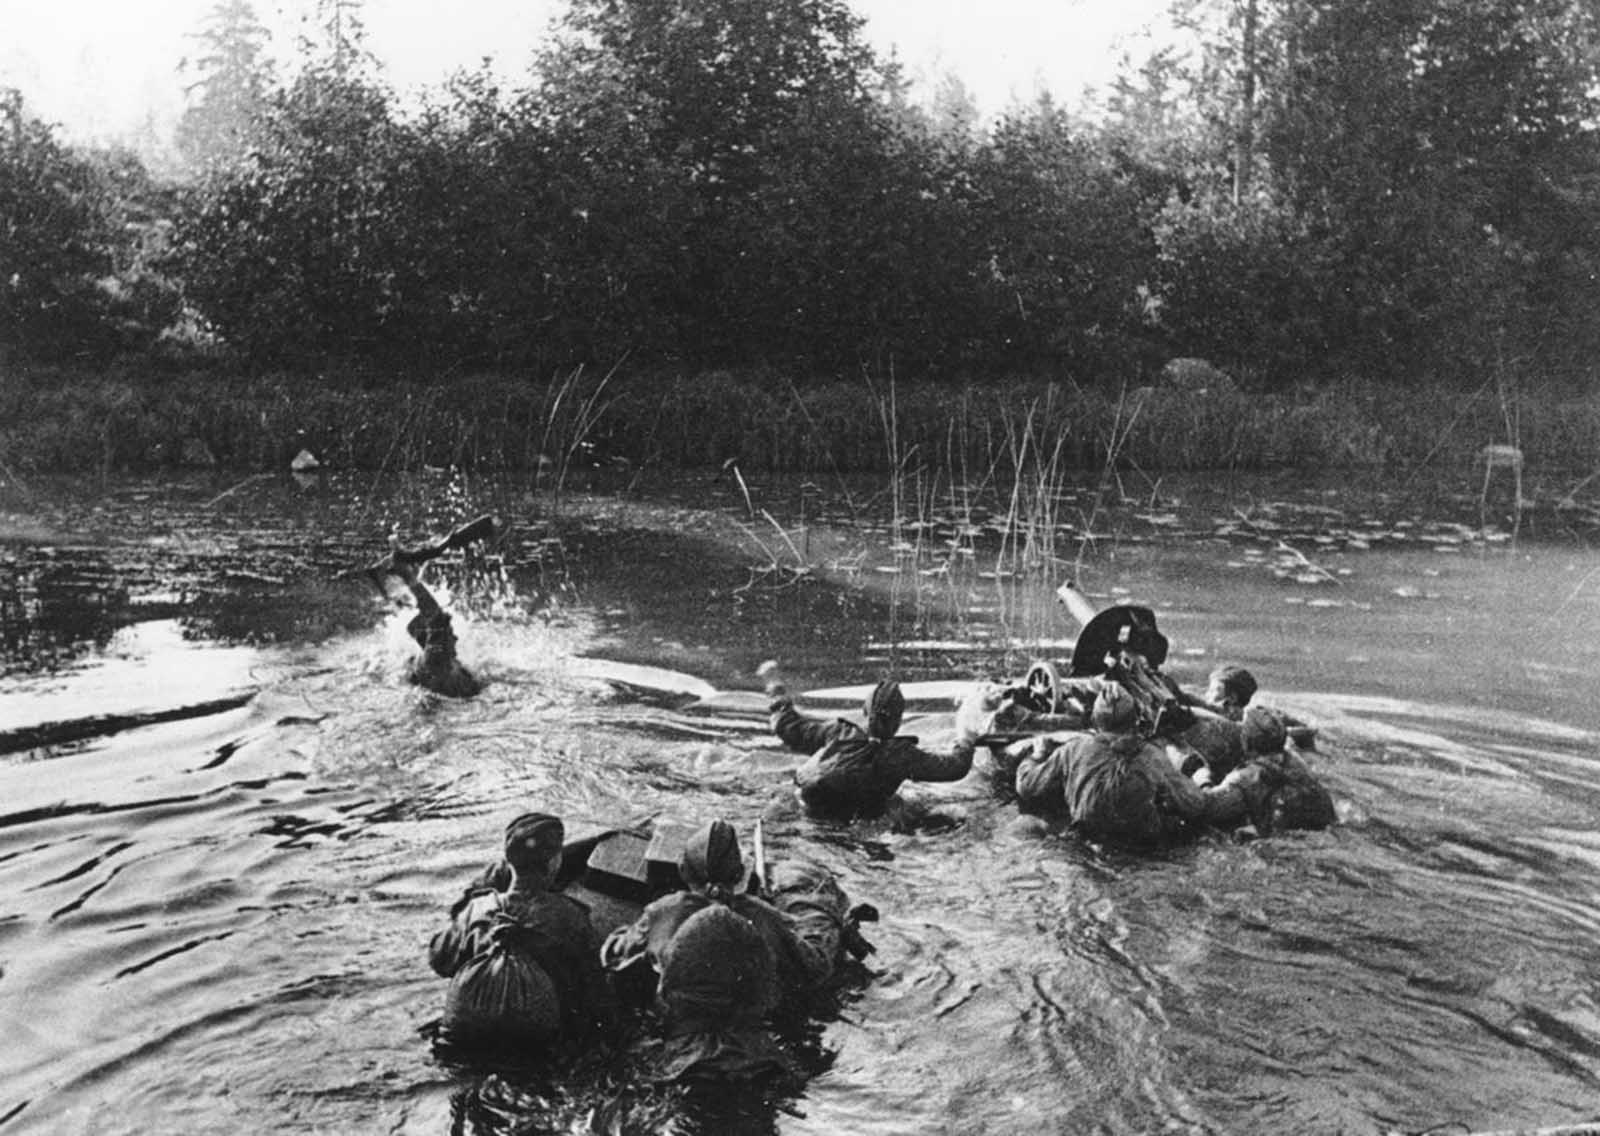 A Soviet machine gun crew crosses a river along the second Baltic front, in January of 1945. The soldier on the left is holding his rifle overhead while his comrades push a floating device with a Maxim machine gun, followed by two men with several supply boxes.